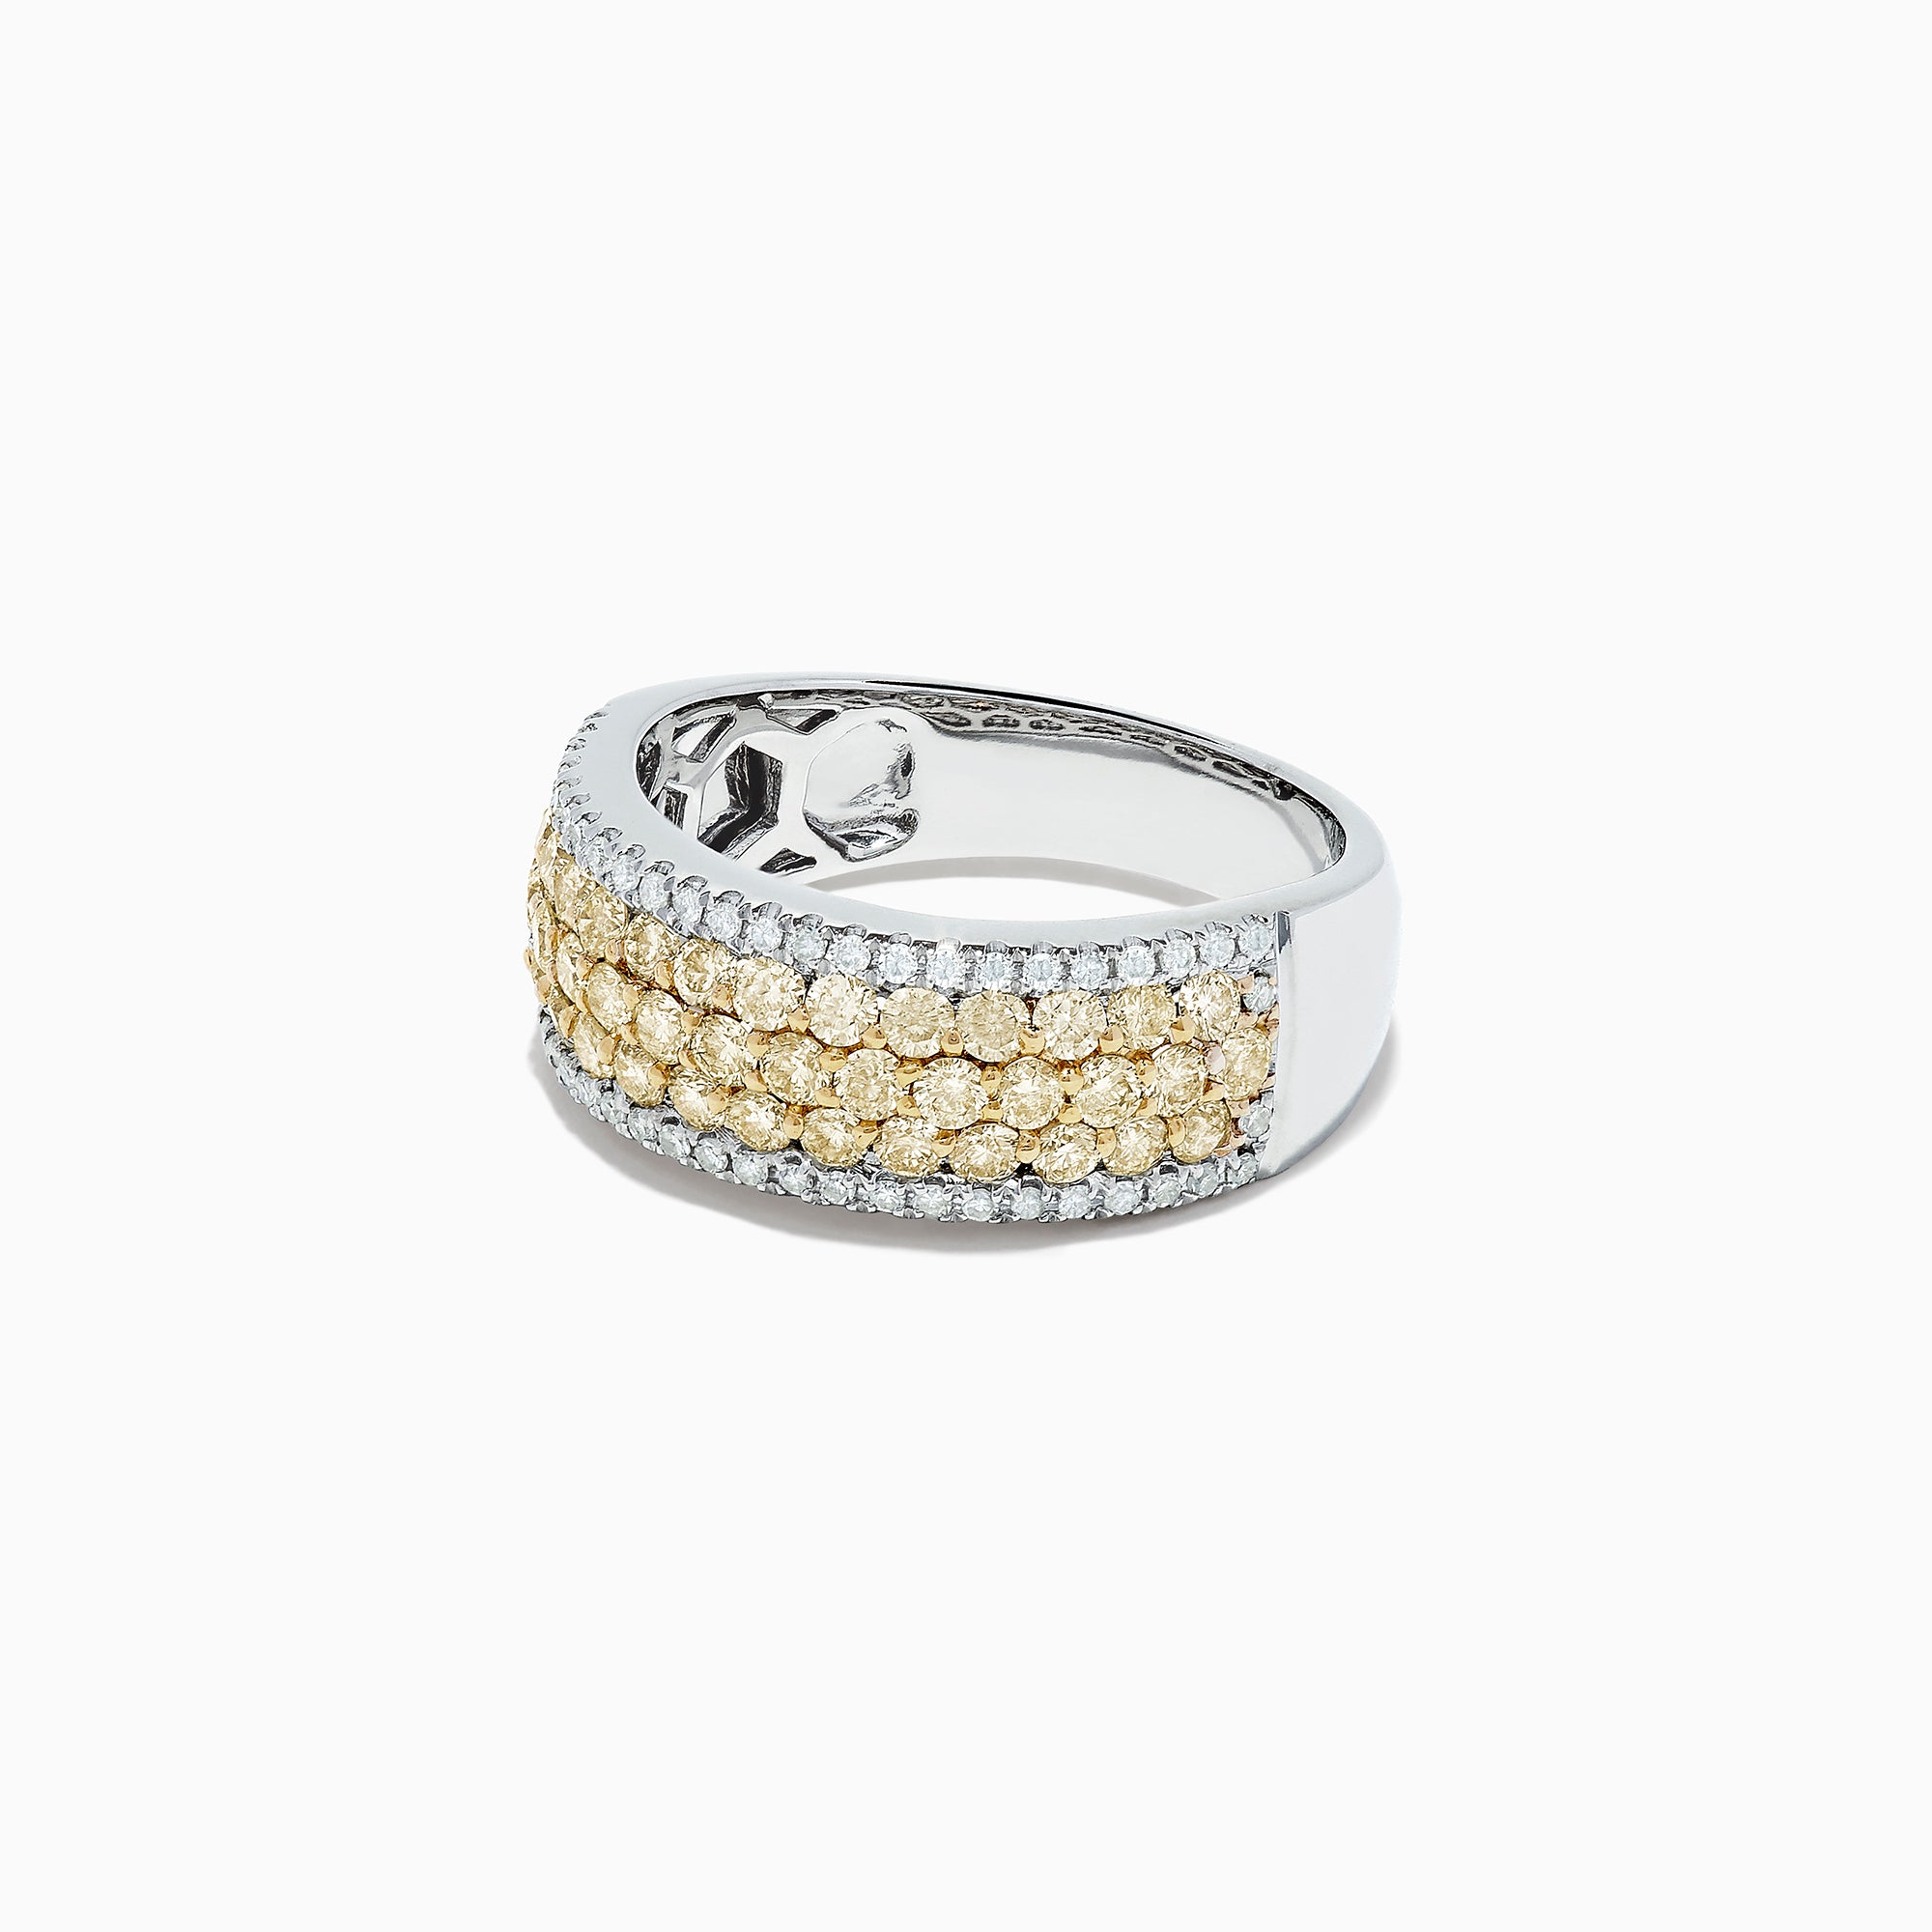 Effy Canare 14K Two Tone Gold Yellow and White Diamond Ring, 1.26 TCW